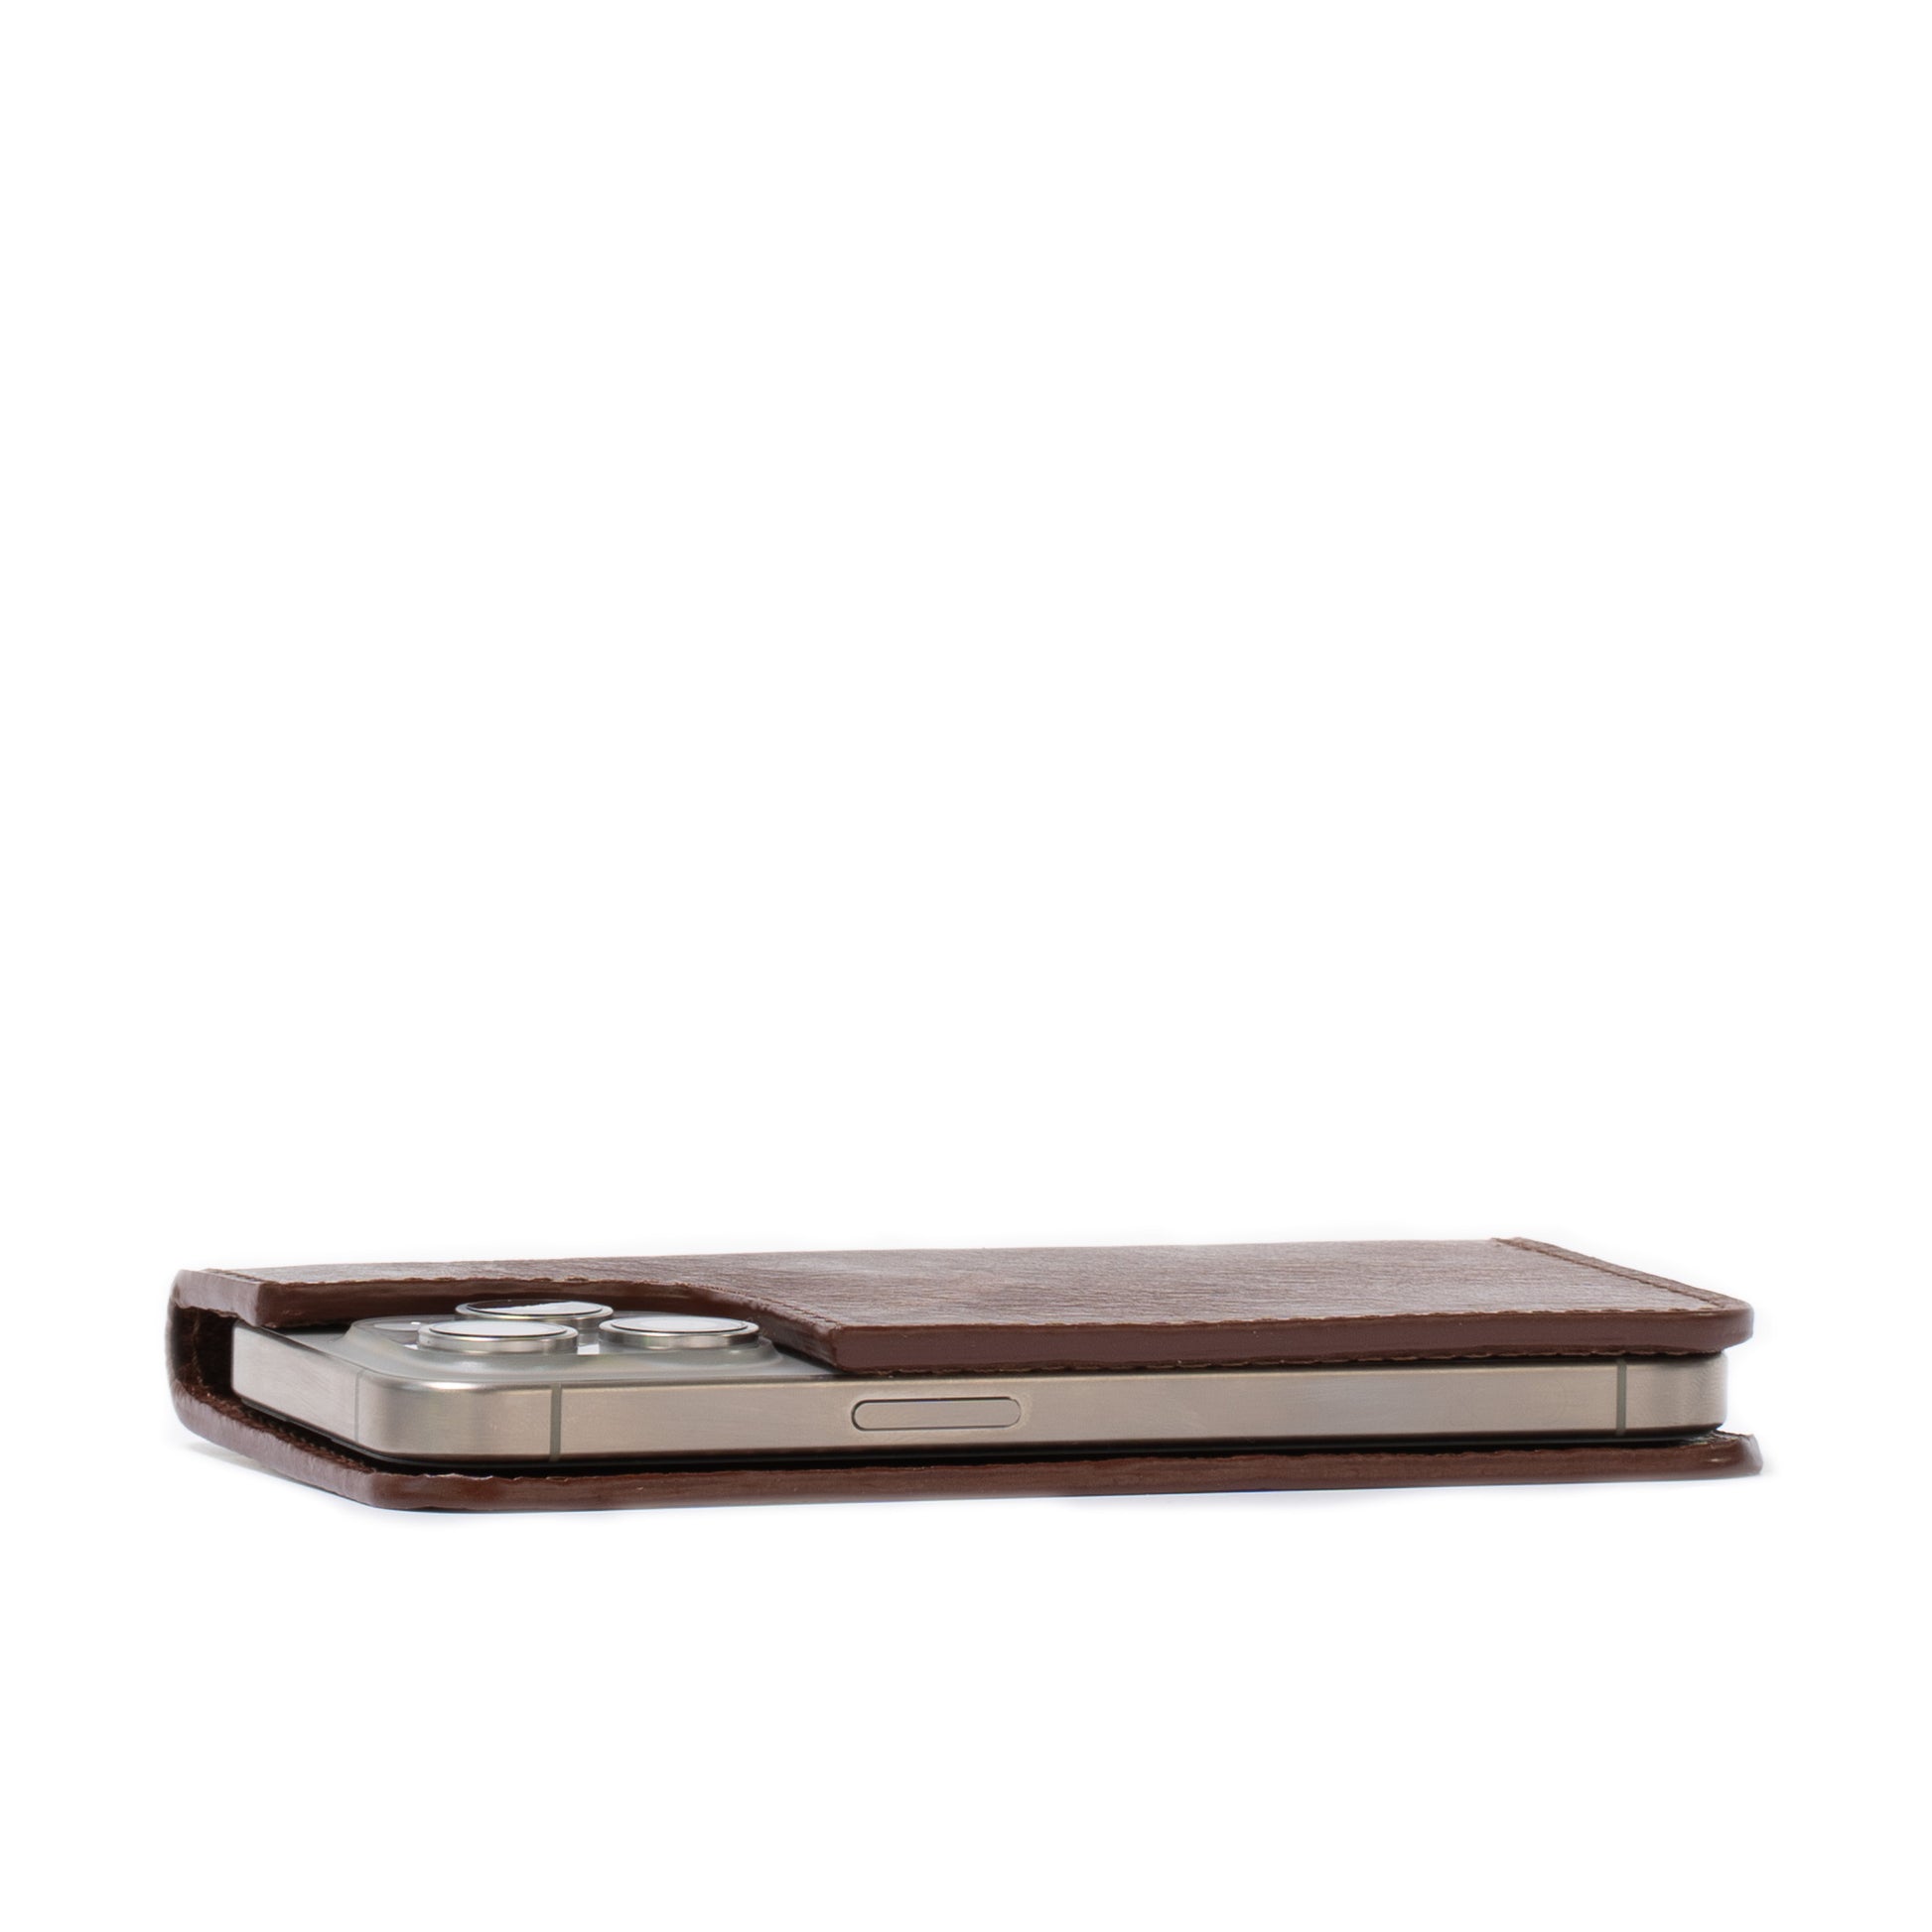 Flip case with MagSafe for iPhone 15 Pro - The Minimalist 3.0, made by Geometric Goods in dark brown (mahogany) color